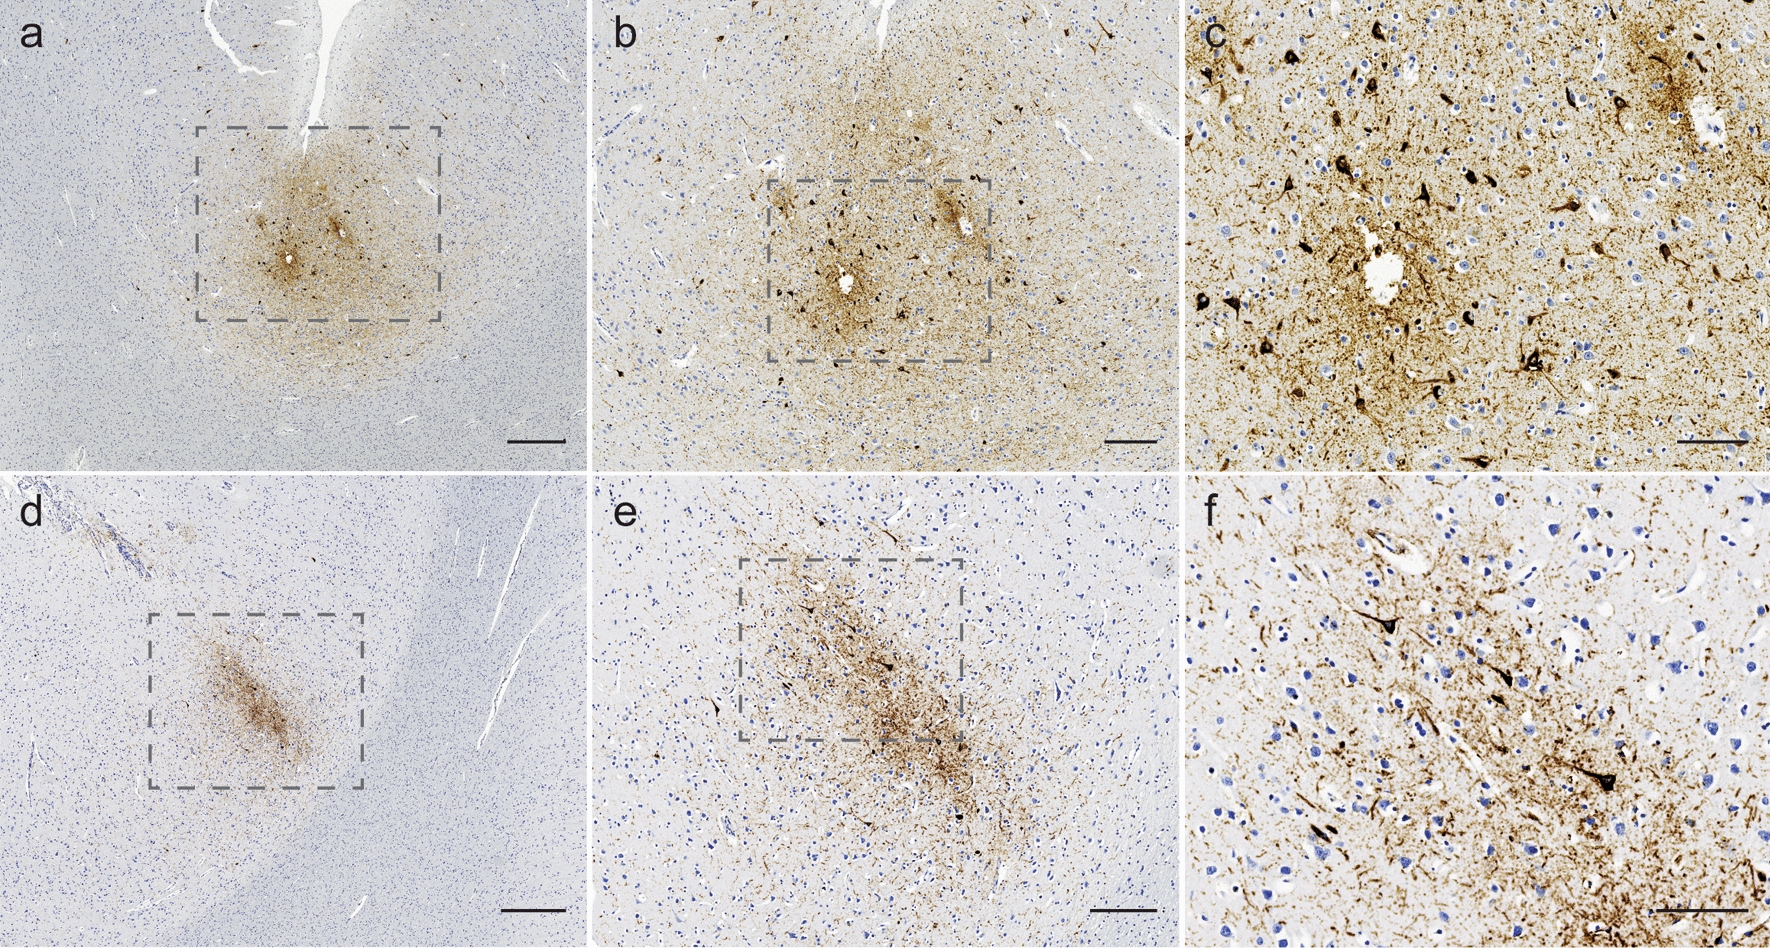 Chronic traumatic encephalopathy (CTE) in the context of longstanding intimate partner violence